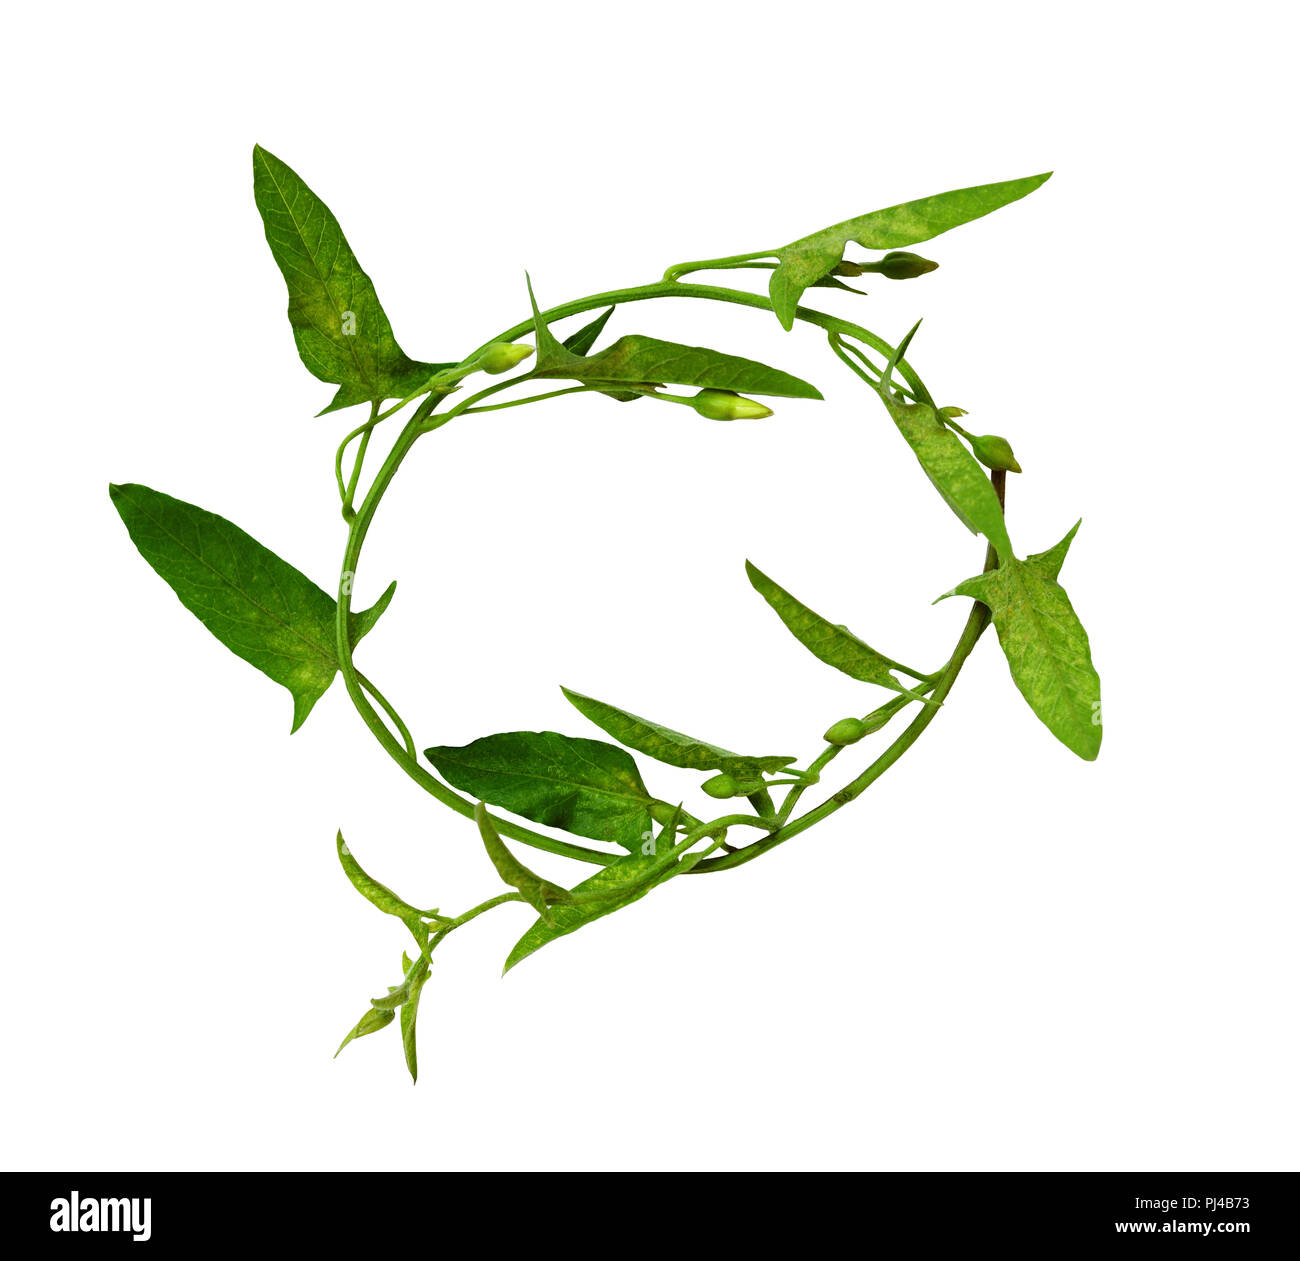 Round frame from bindweed sprig with green leaves and buds isolated on white background Stock Photo